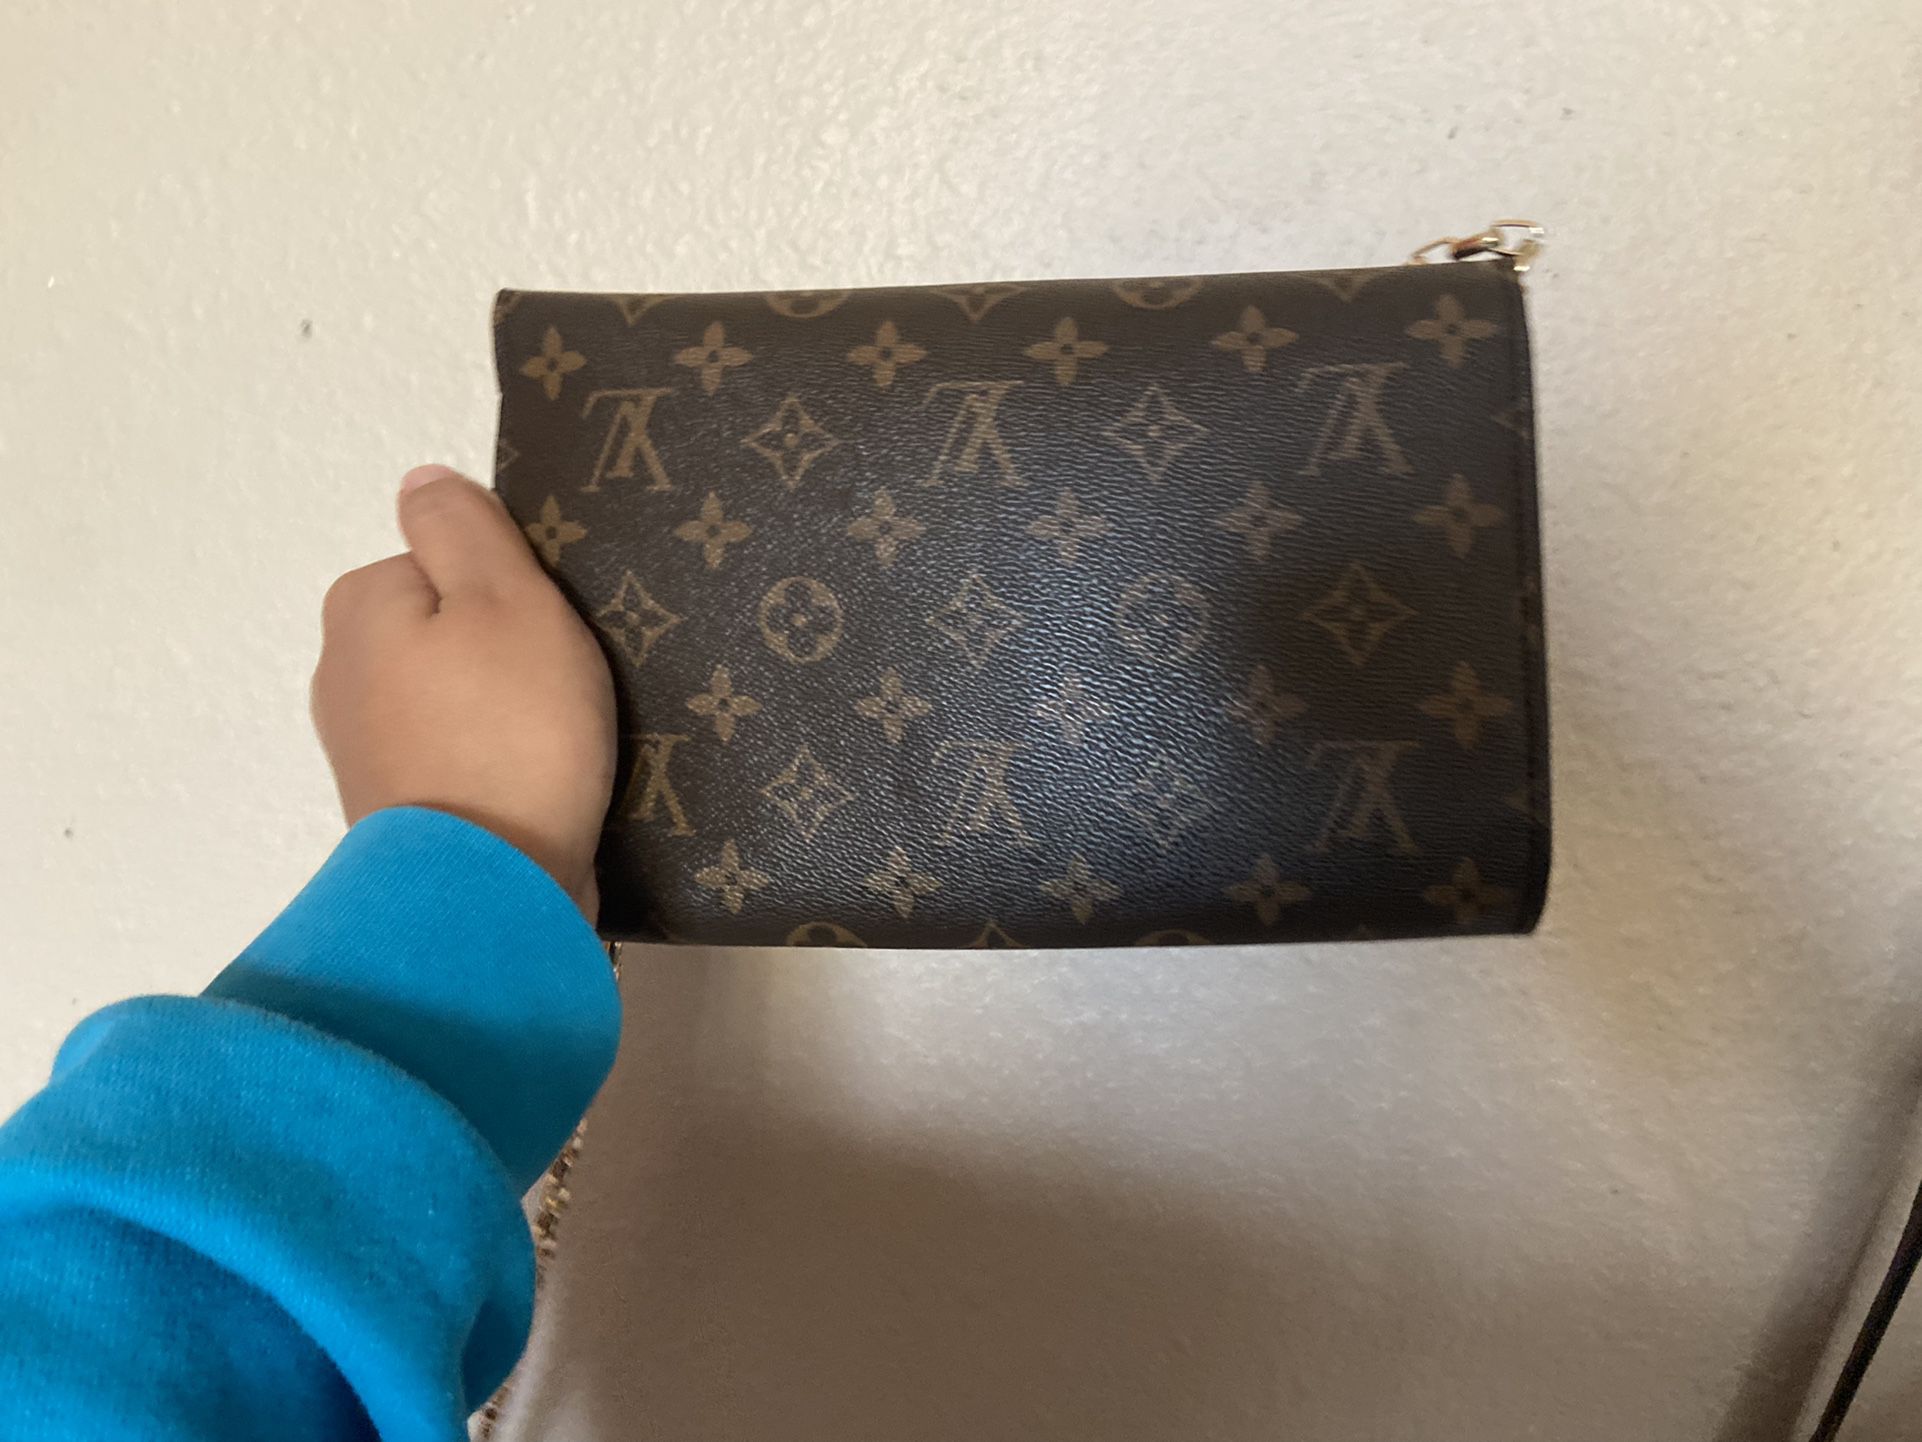 Louis Vuitton Clutch With Chain for Sale in Modesto, CA - OfferUp